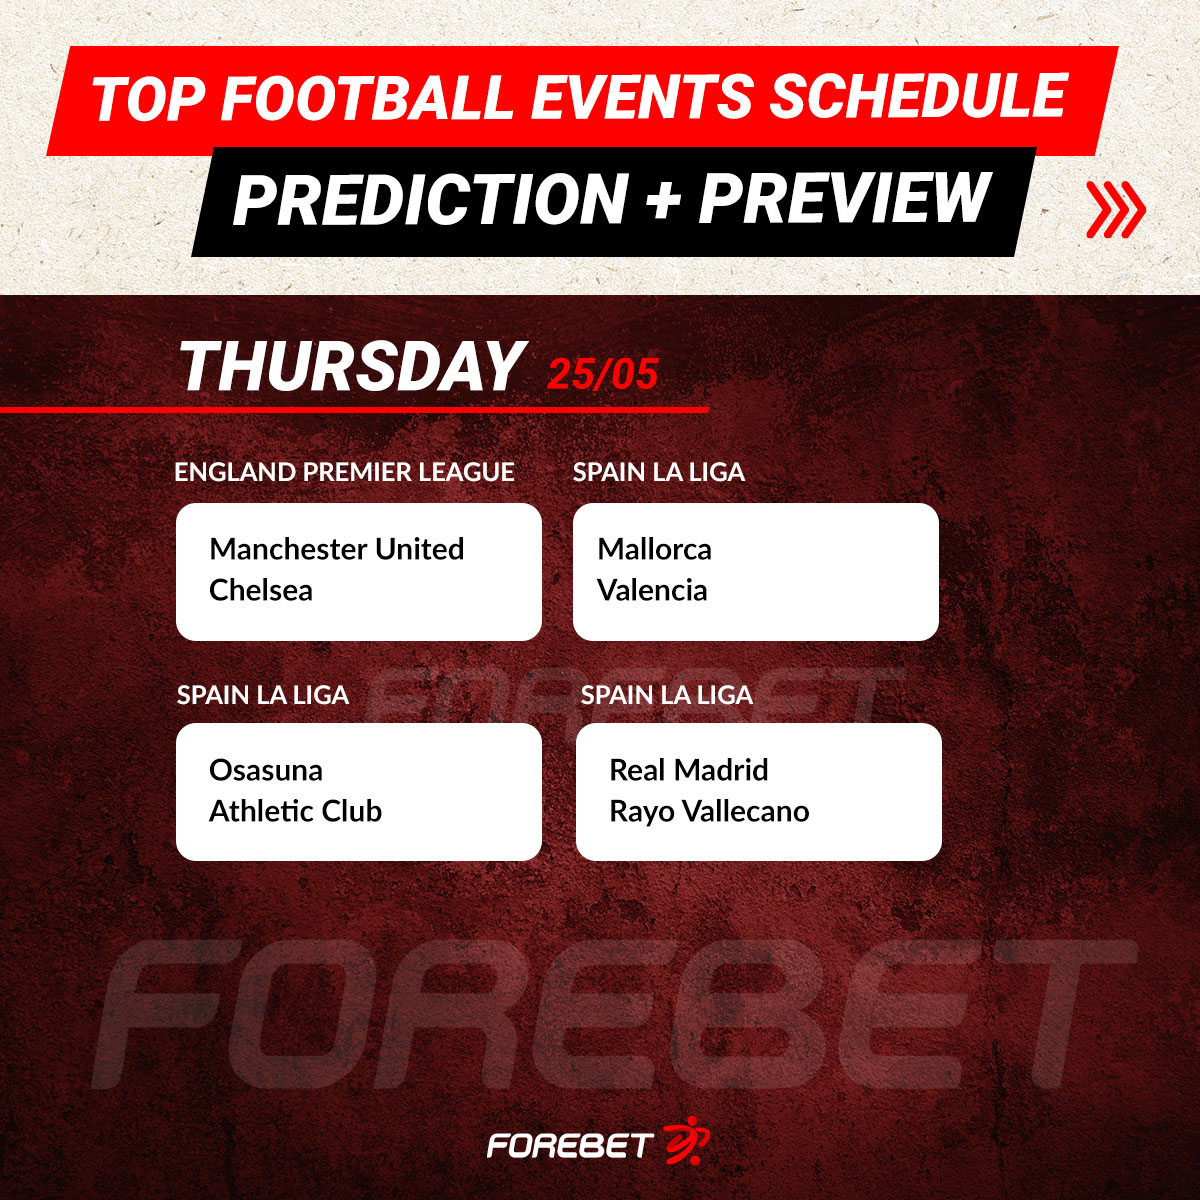 Check out the top football events for the first days of this week! 🤩

#PL #SerieA #LaLiga #coppaitaliafrecciarossa #forebet